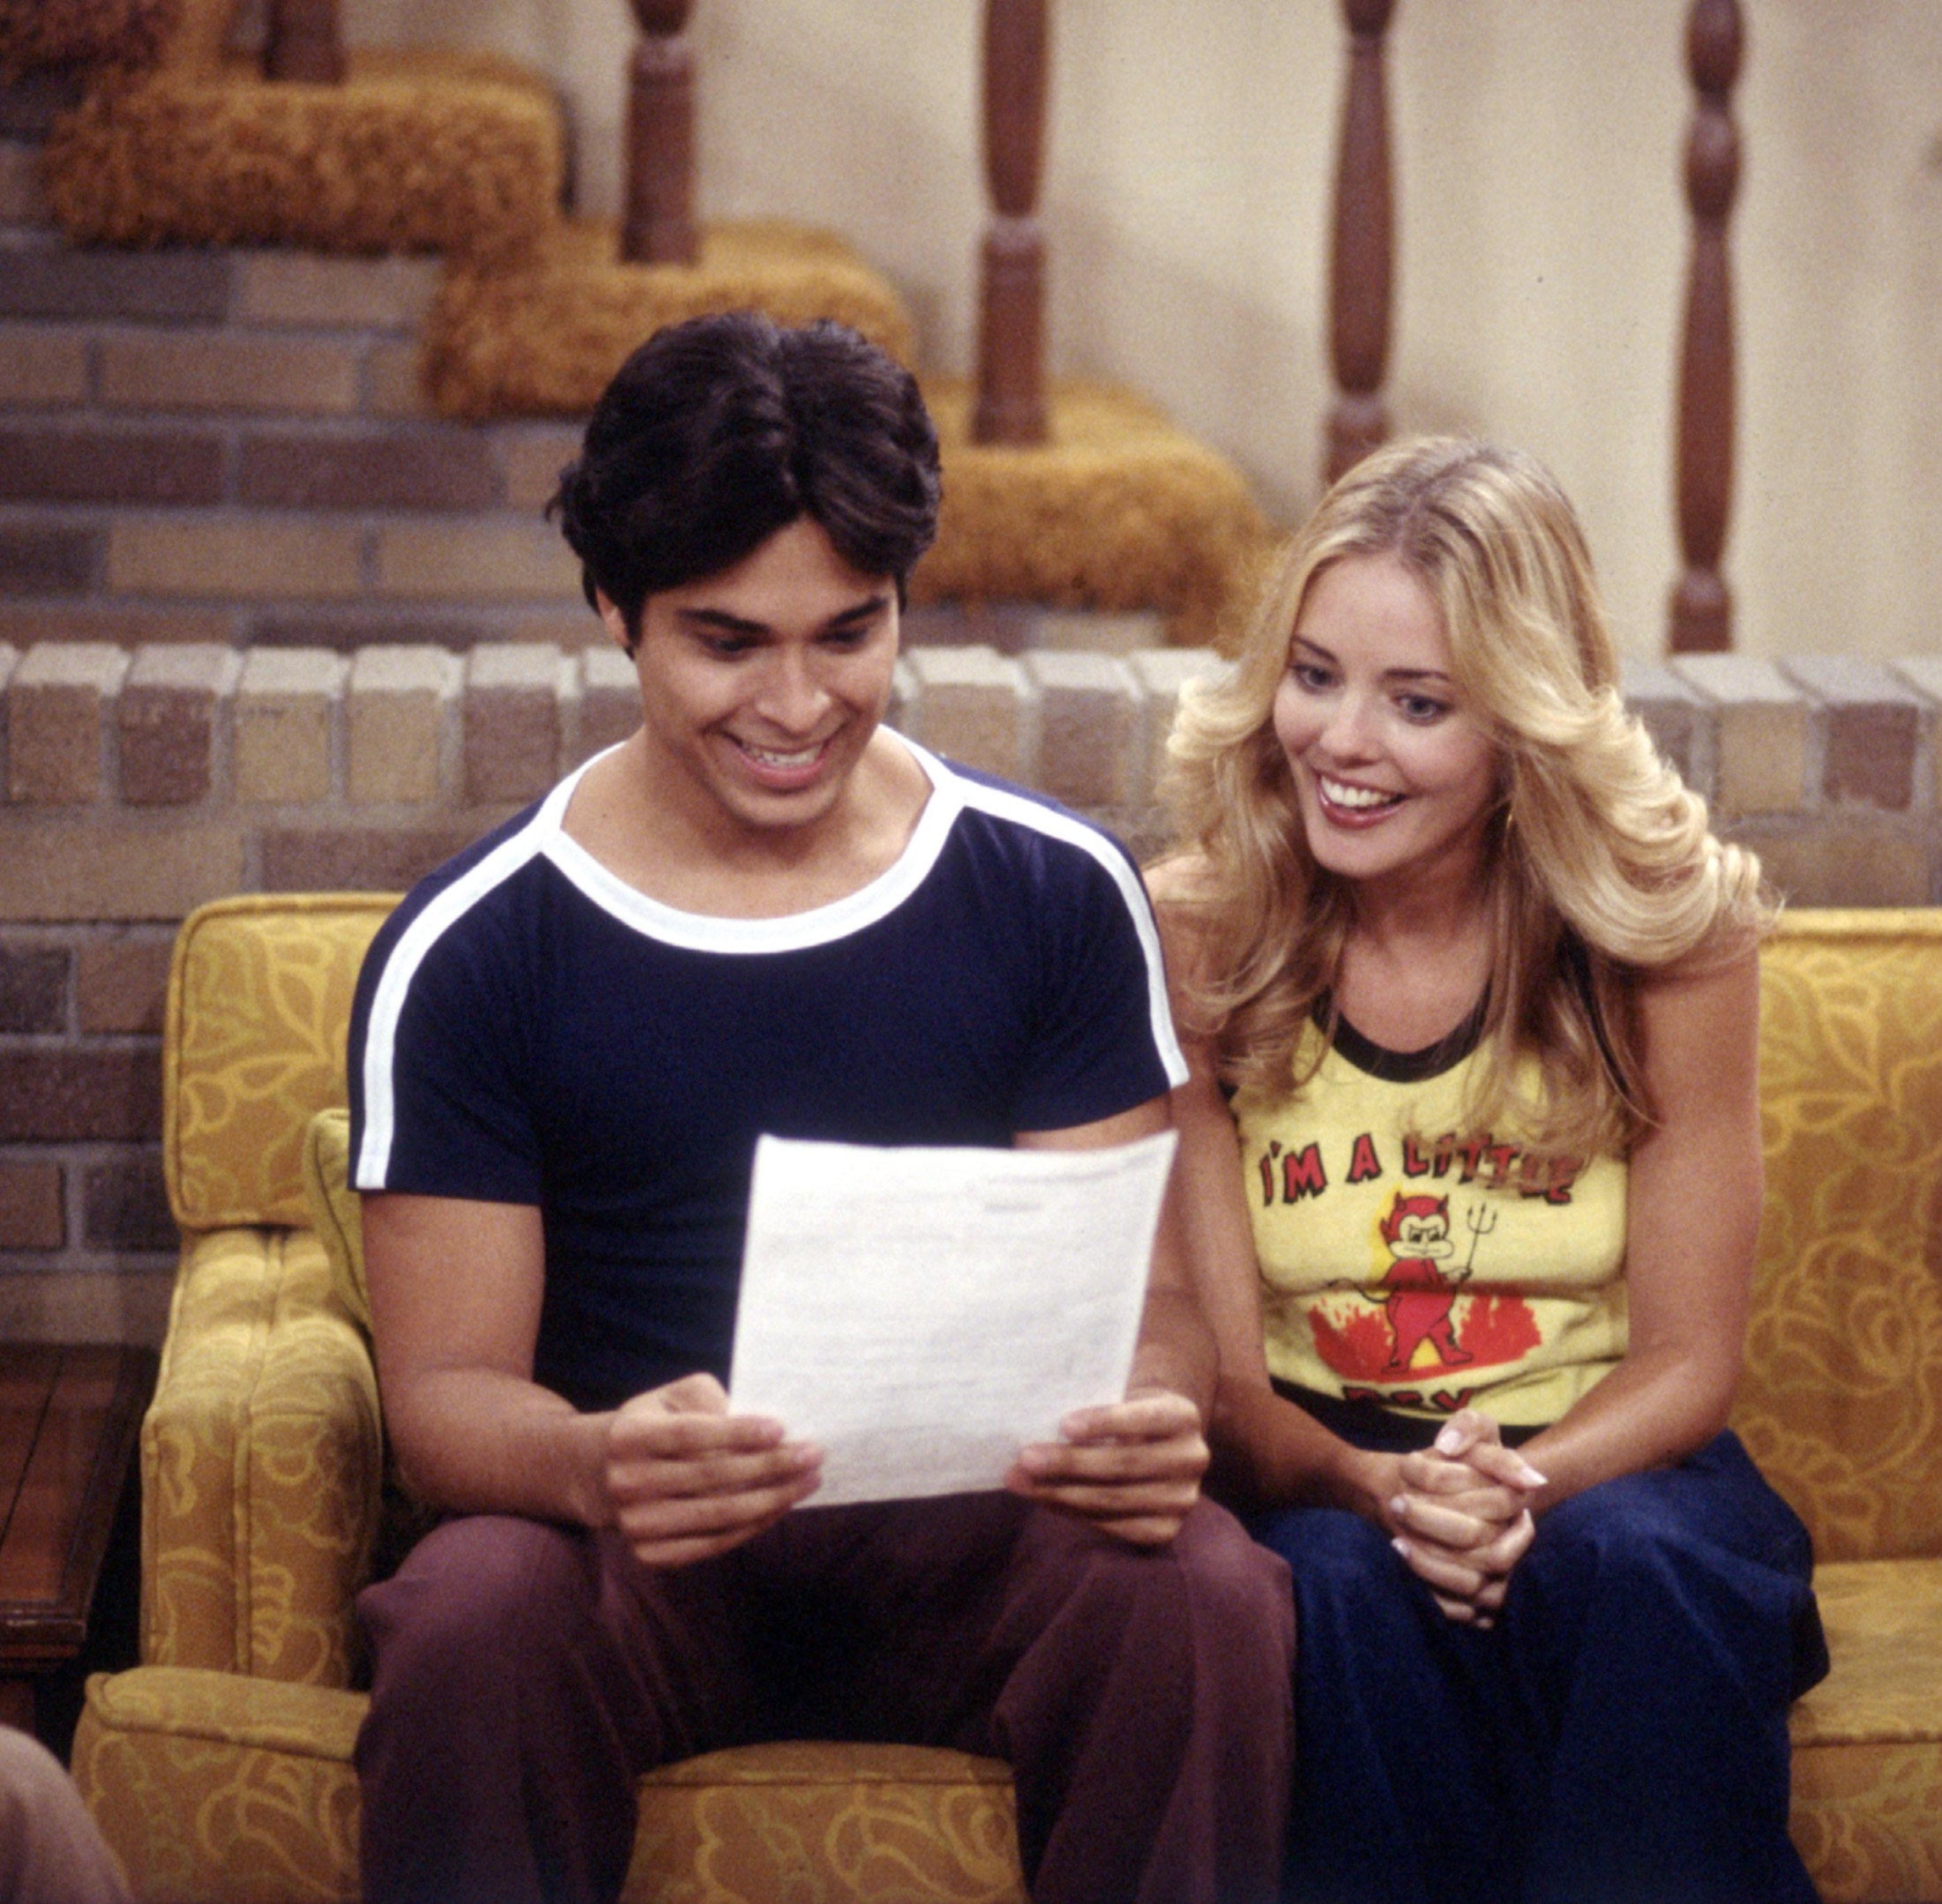 Laurie and Fez looking at a piece of paper and smiling